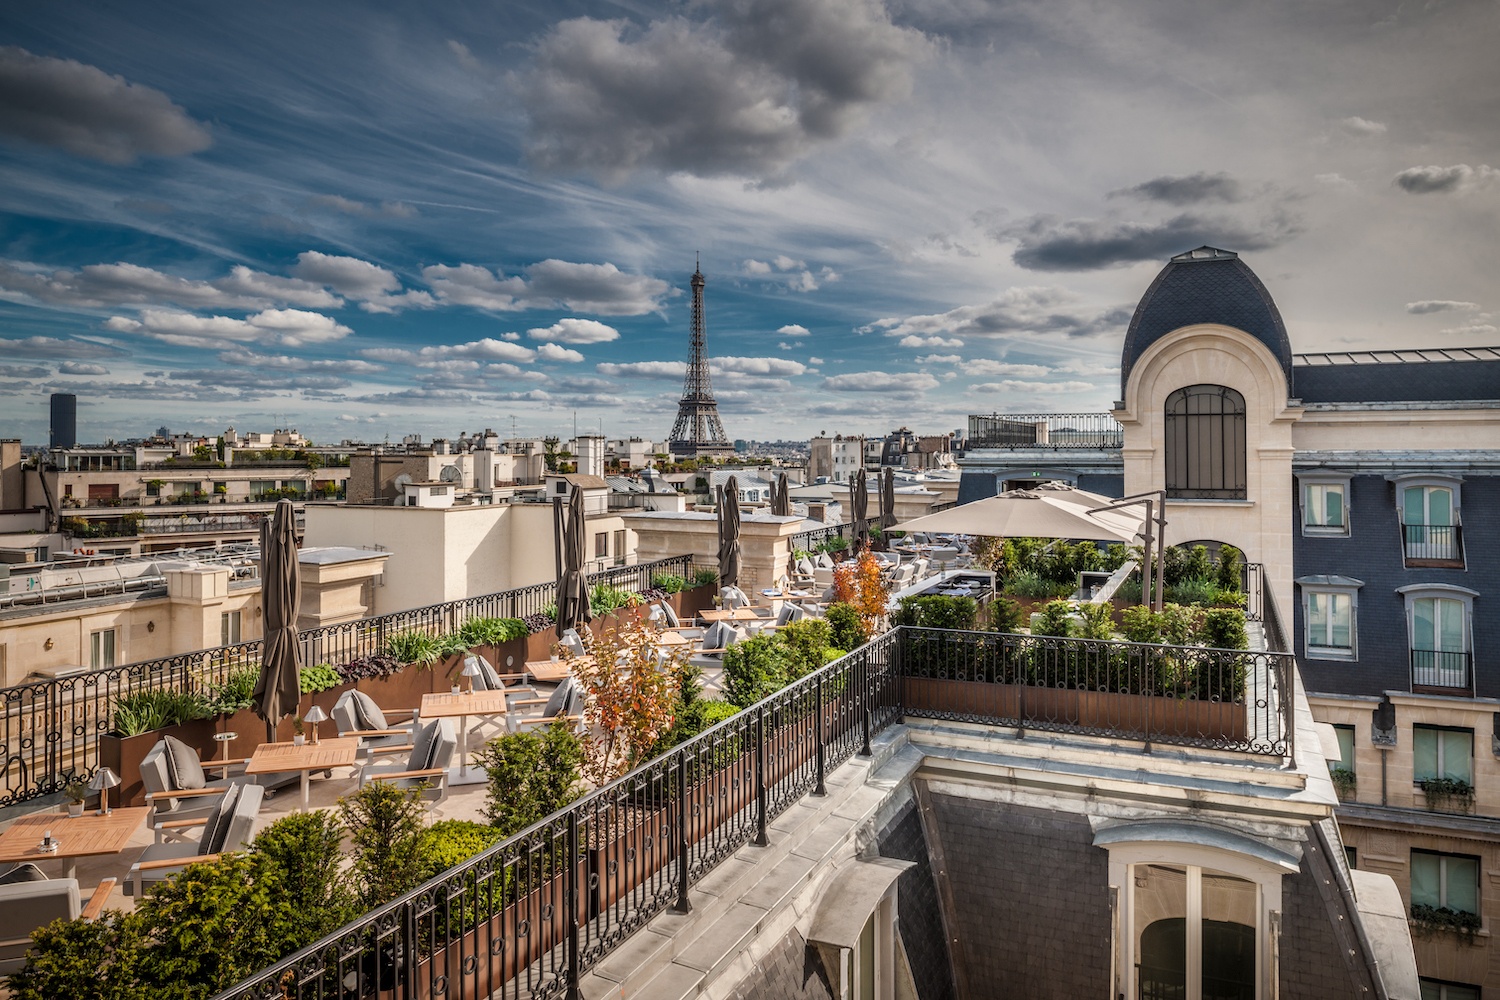 Where to Find the 10+ Best Eiffel Tower Views in Paris